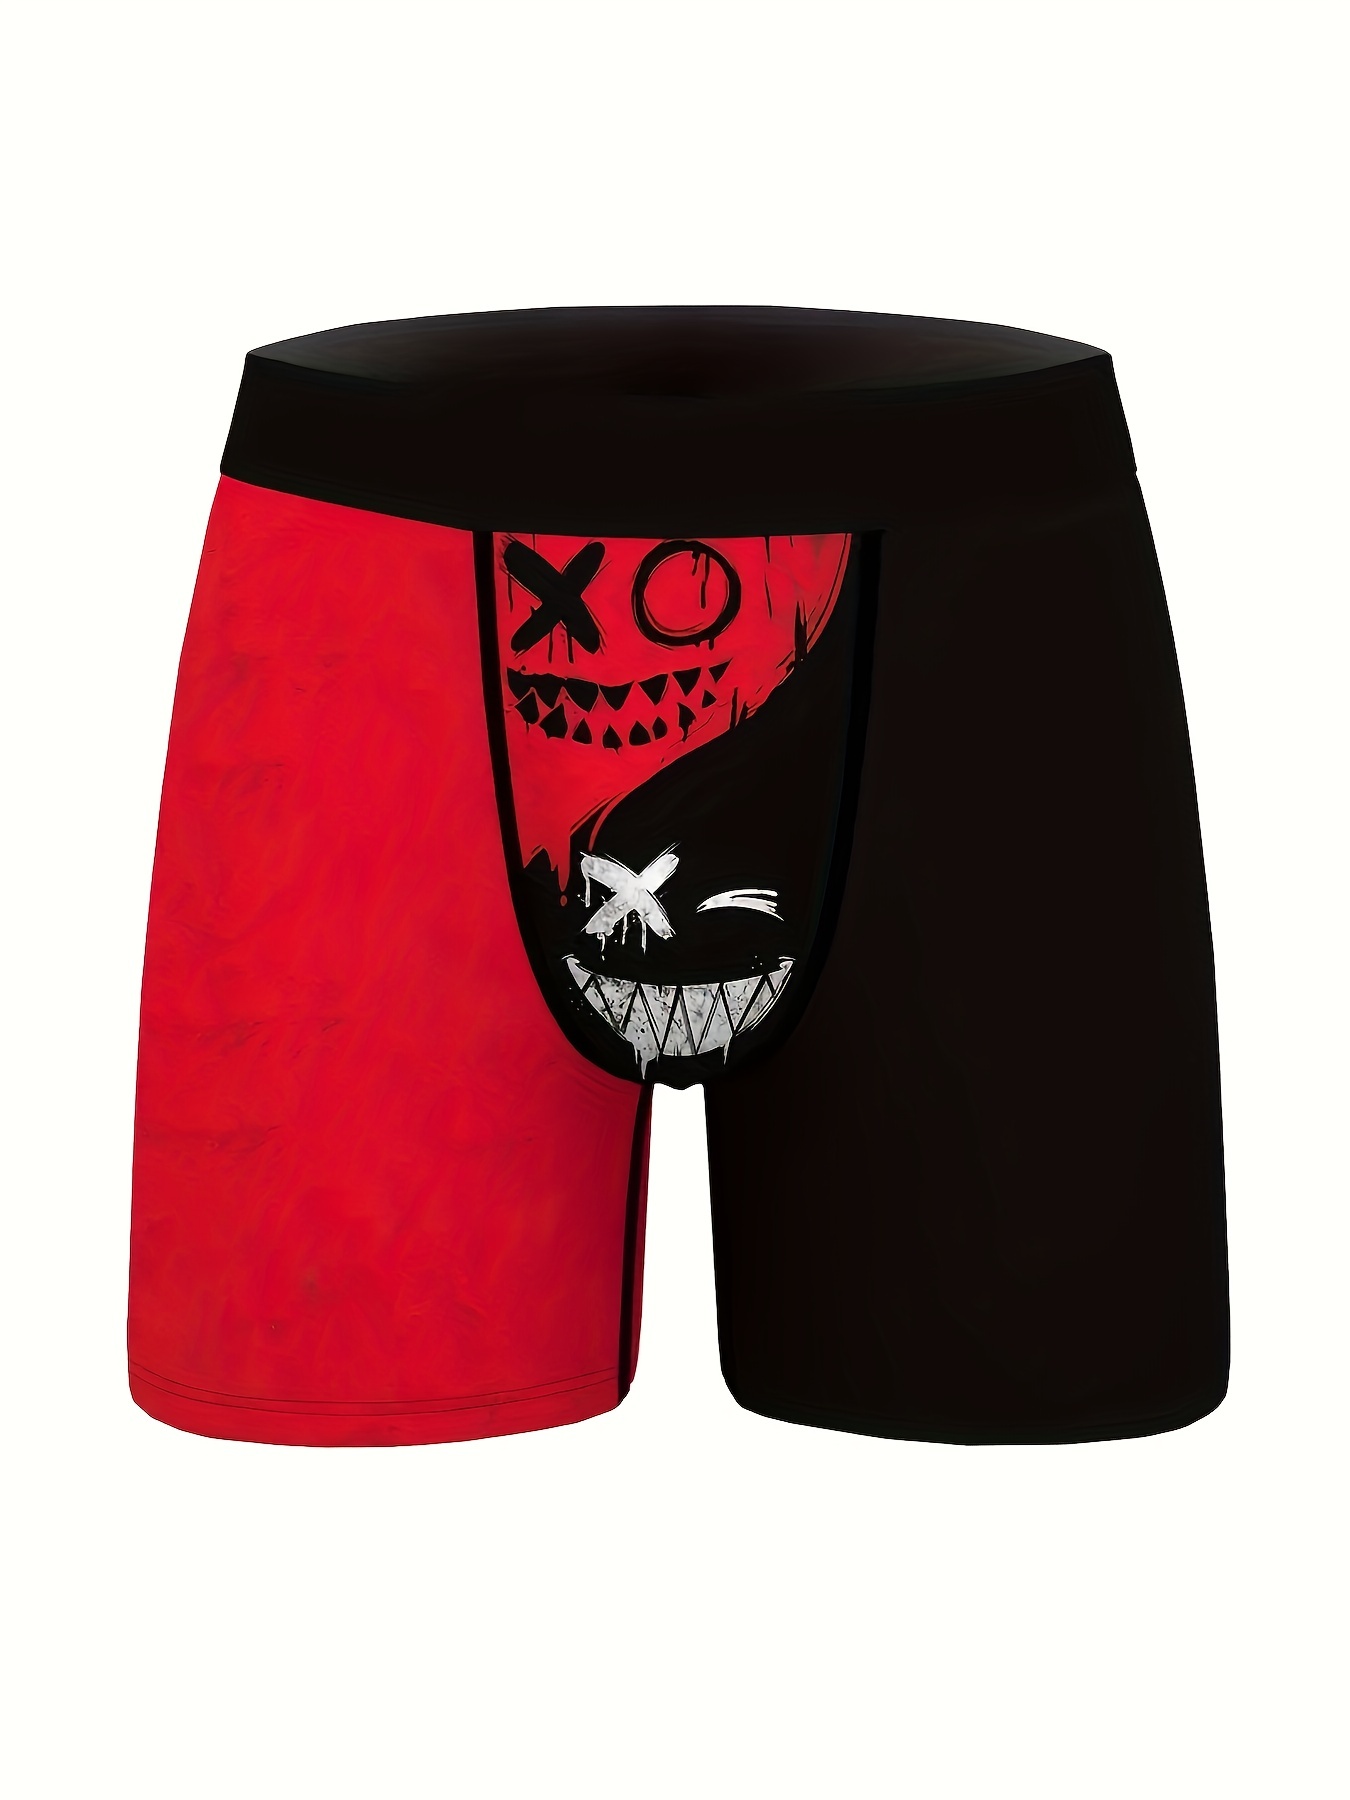 ATHLETIC TECH – BOXER BRIEFS | 3-PACK BLACK & RED